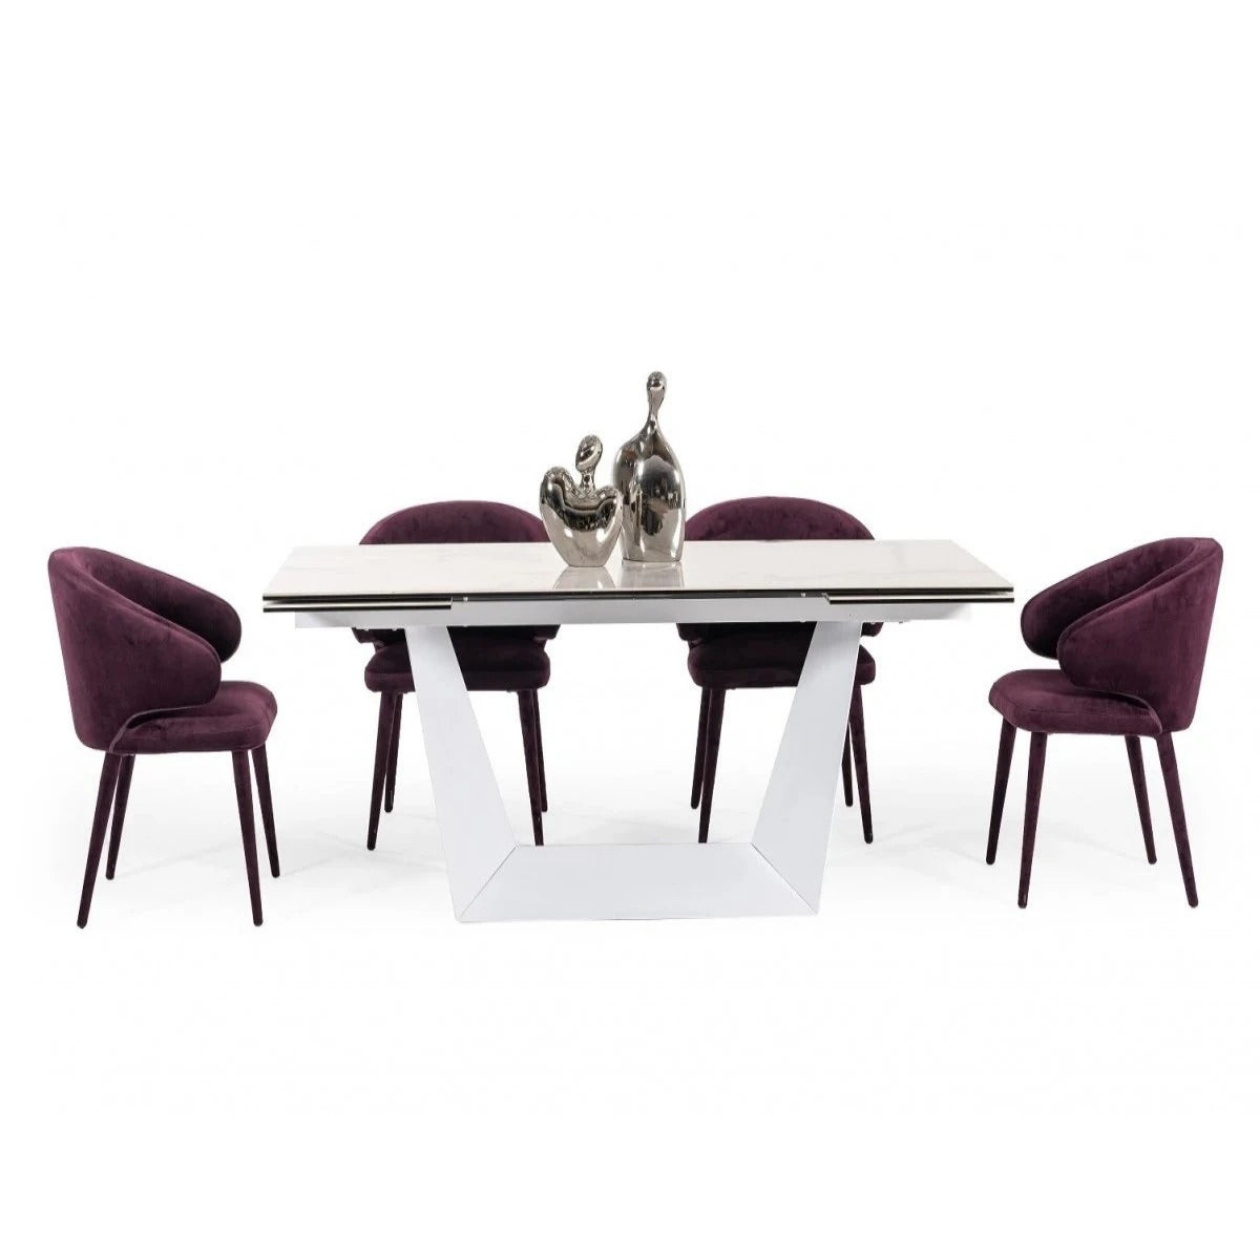 Premium Dining Table Blowen Extendable Dining Table